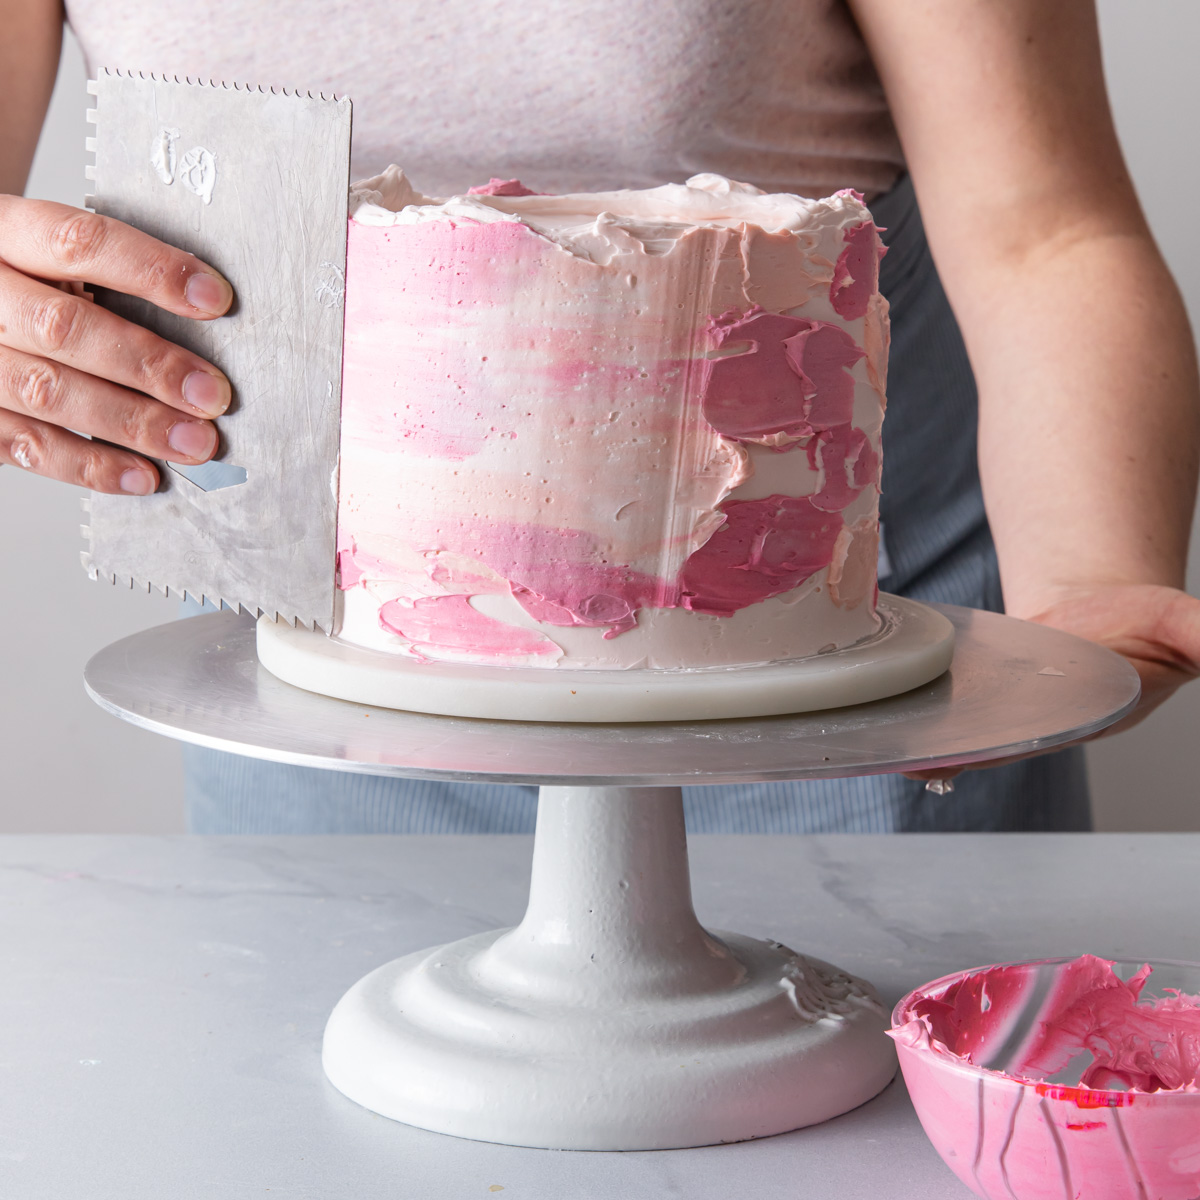 The Beginner's Guide to Cake Decorating